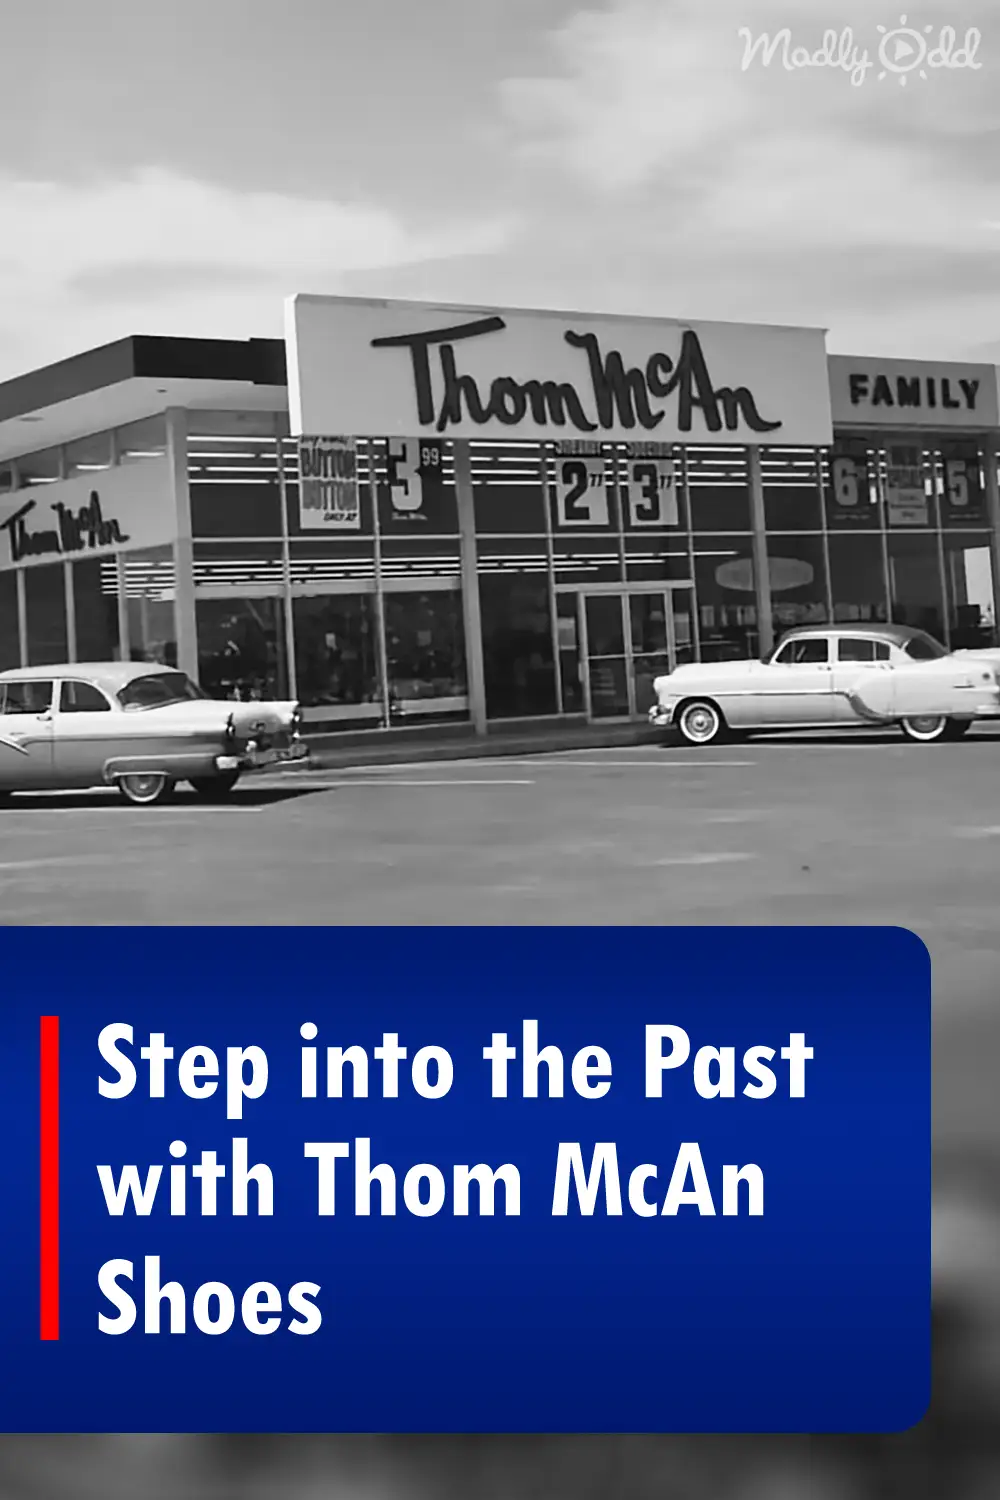 Step into the Past with Thom McAn Shoes